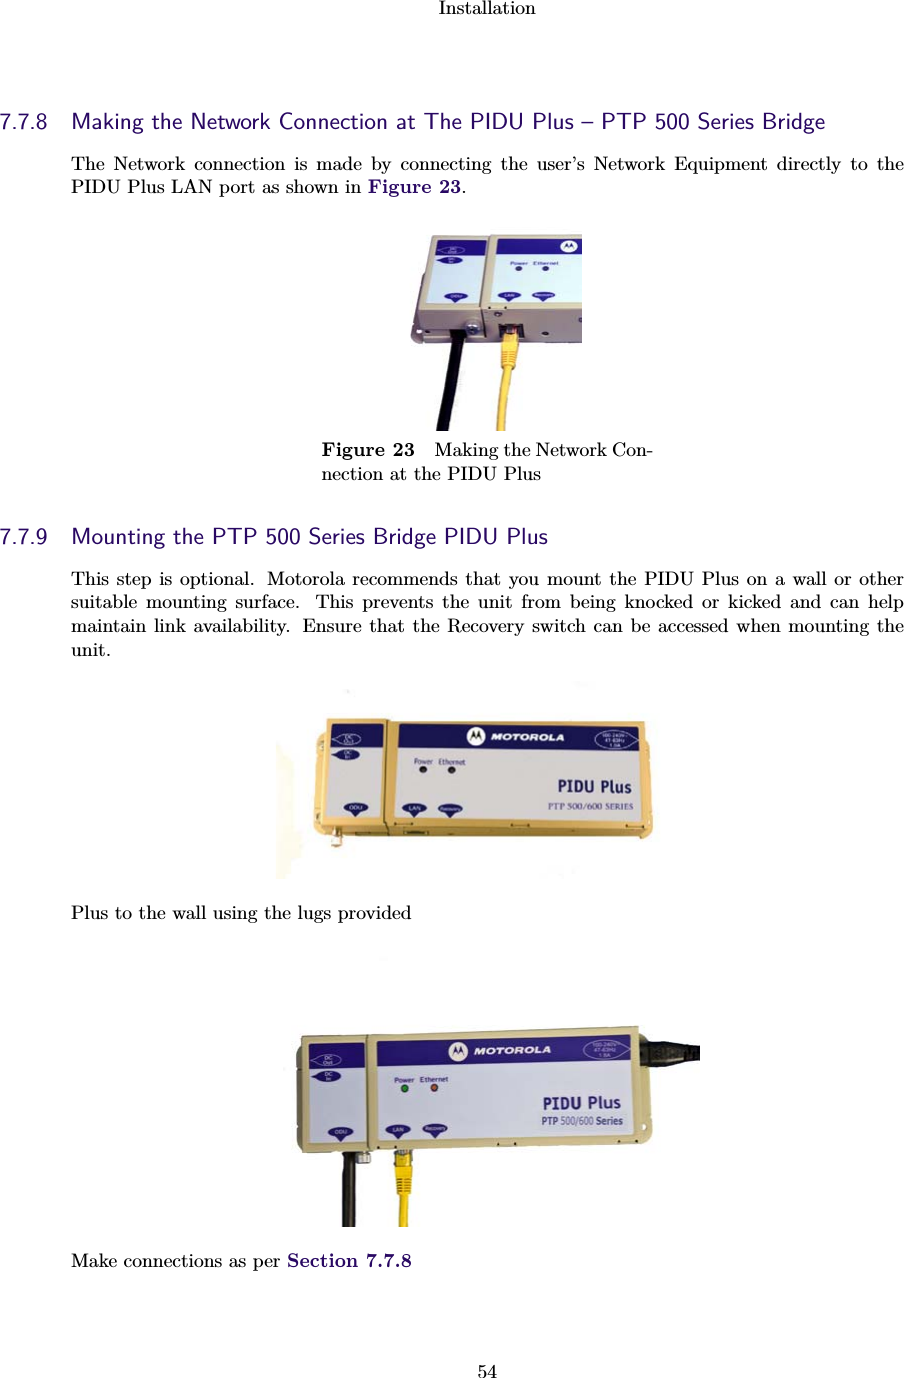 Installation547.7.8 Making the Network Connection at The PIDU Plus – PTP 500 Series BridgeThe Network connection is made by connecting the user’s Network Equipment directly to thePIDU Plus LAN port as shown in Figure 23.Figure 23 Making the Network Con-nection at the PIDU Plus7.7.9 Mounting the PTP 500 Series Bridge PIDU PlusThis step is optional. Motorola recommends that you mount the PIDU Plus on a wall or othersuitable mounting surface. This prevents the unit from being knocked or kicked and can helpmaintain link availability. Ensure that the Recovery switch can be accessed when mounting theunit.Plus to the wall using the lugs providedMake connections as per Section 7.7.8